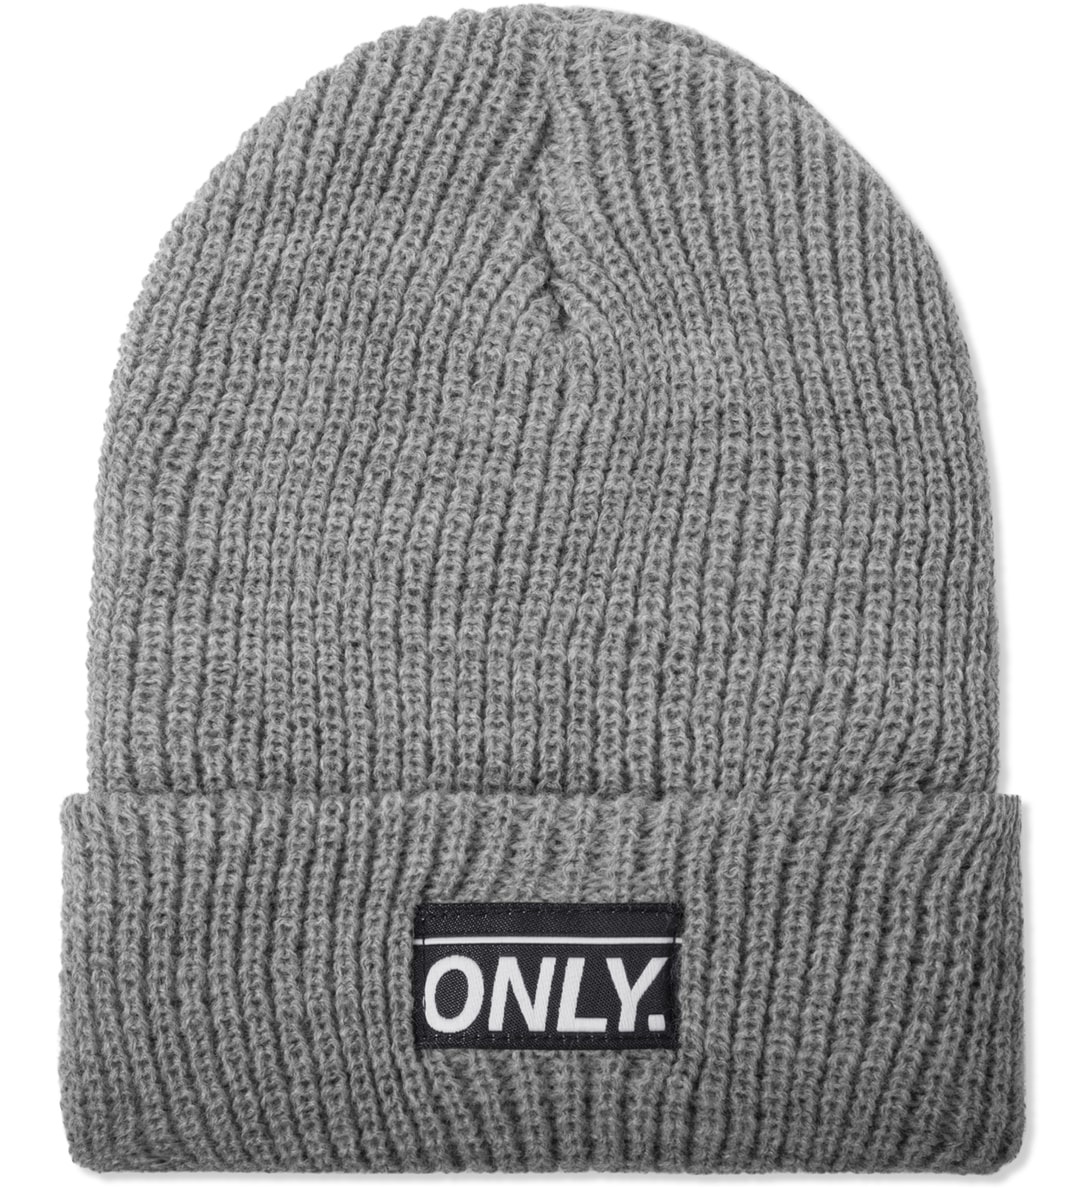 Only Ny - Heather Grey Subway Beanie | HBX - Globally Curated Fashion ...